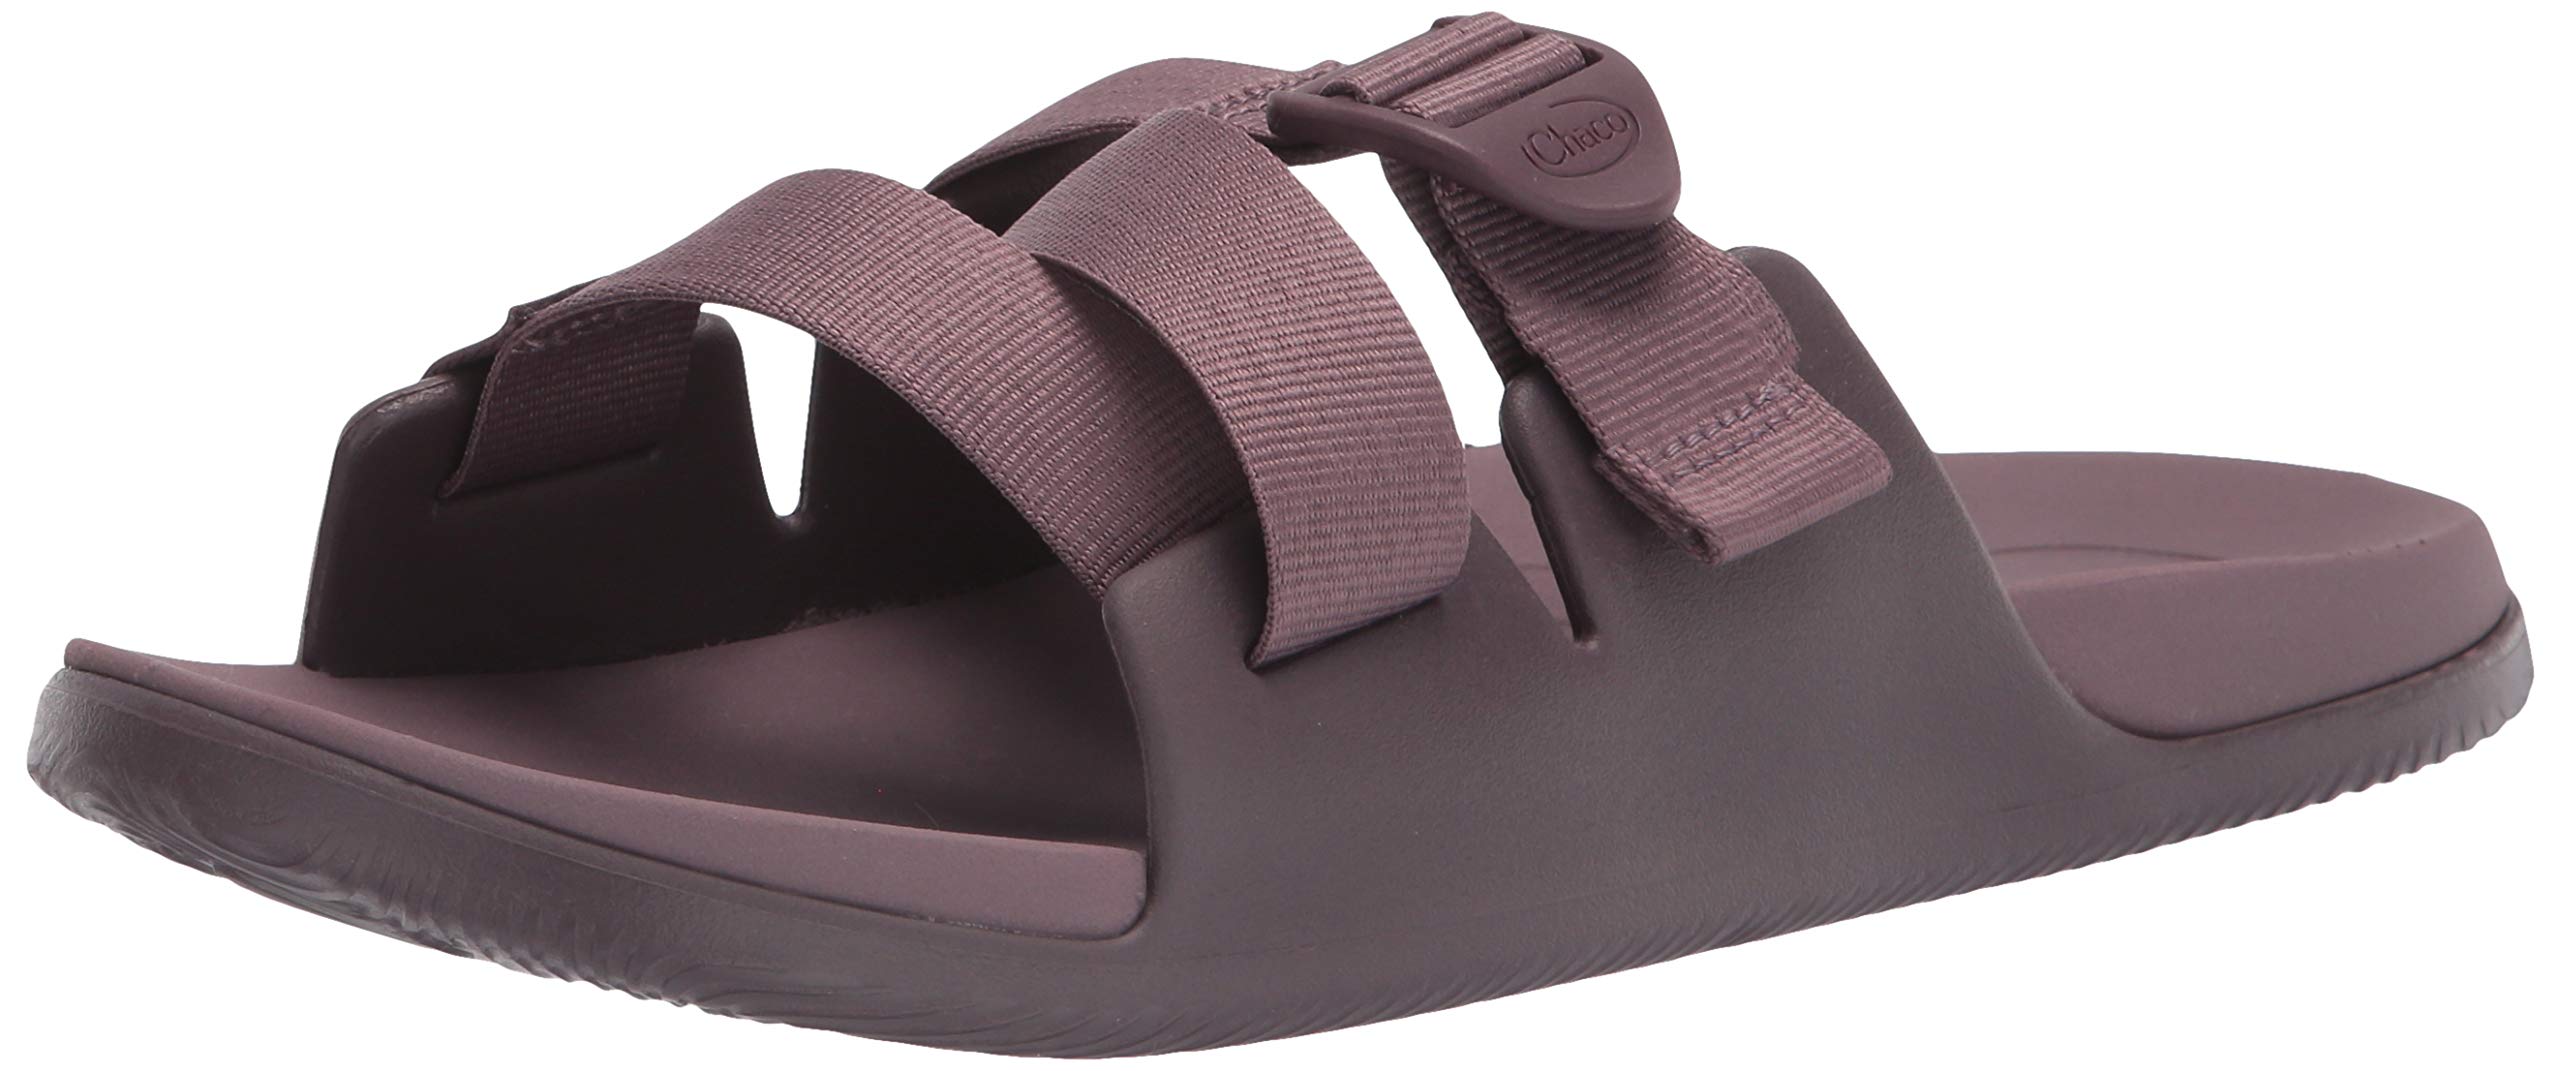 Chaco Womens Chillos Slide Sandals - Sparrow - 7